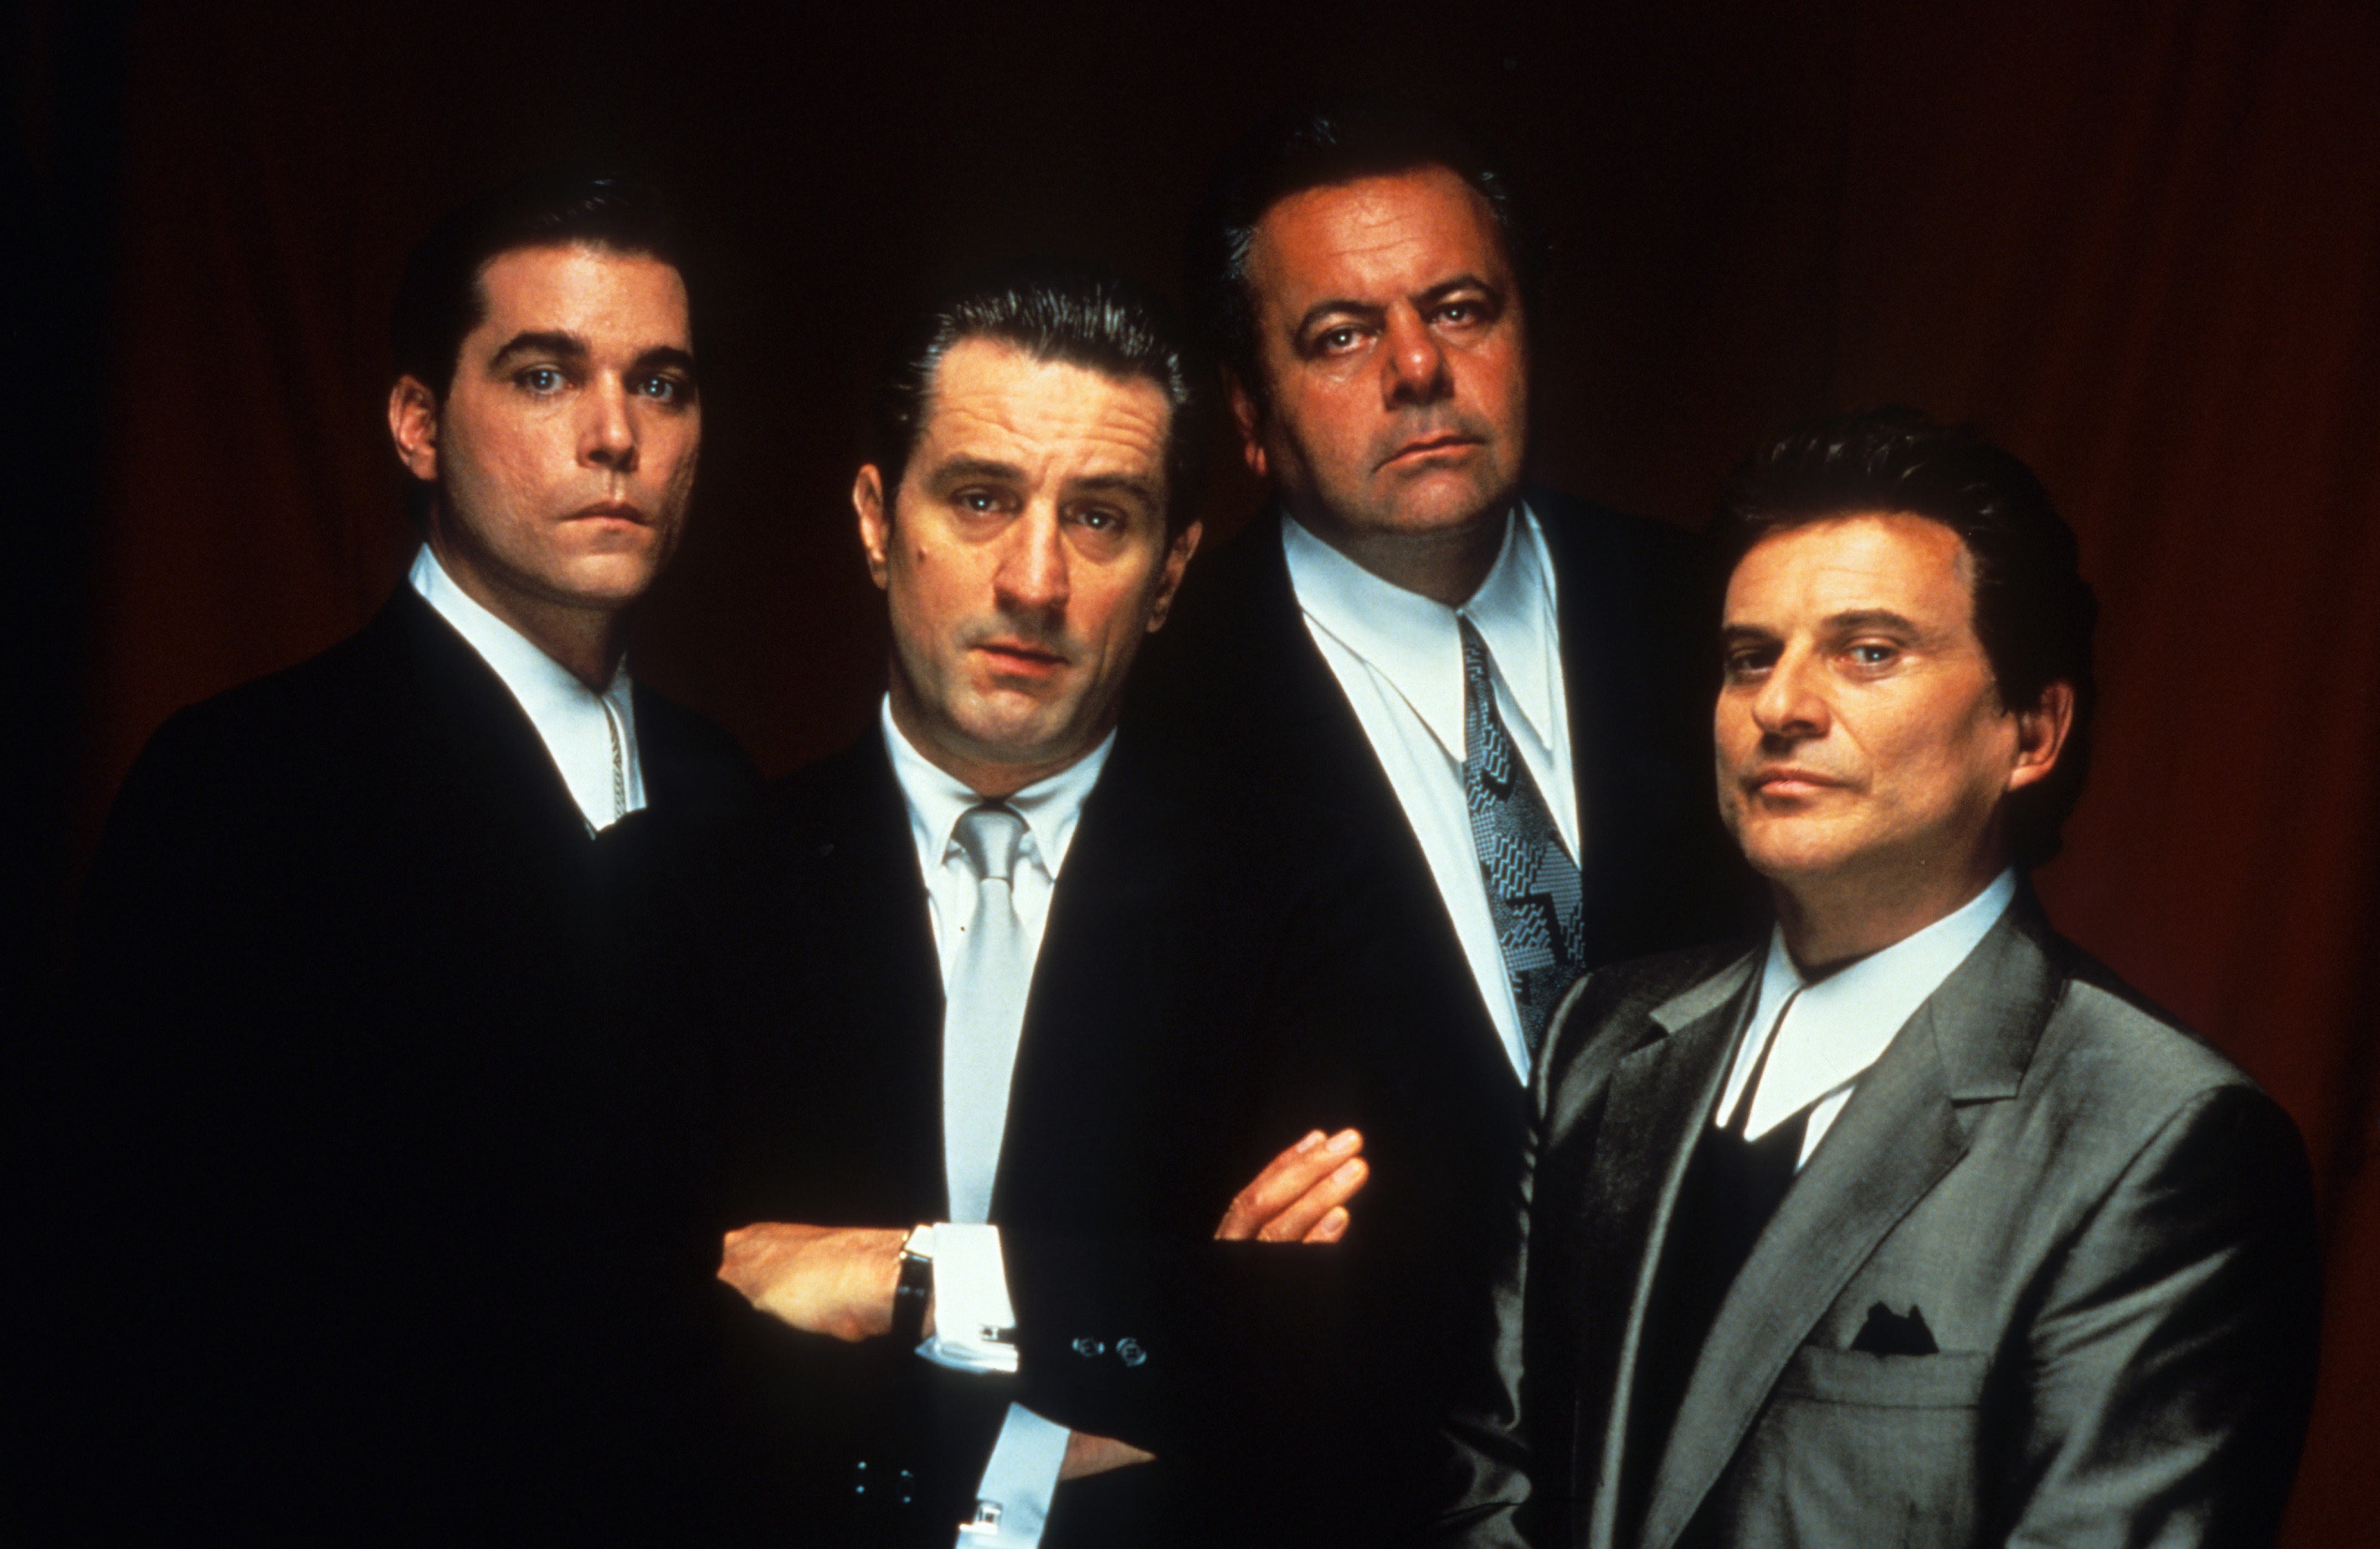 AMC triggers backlash for adding warning to 'Goodfellas' for stereotypes that don't match modern 'inclusion'